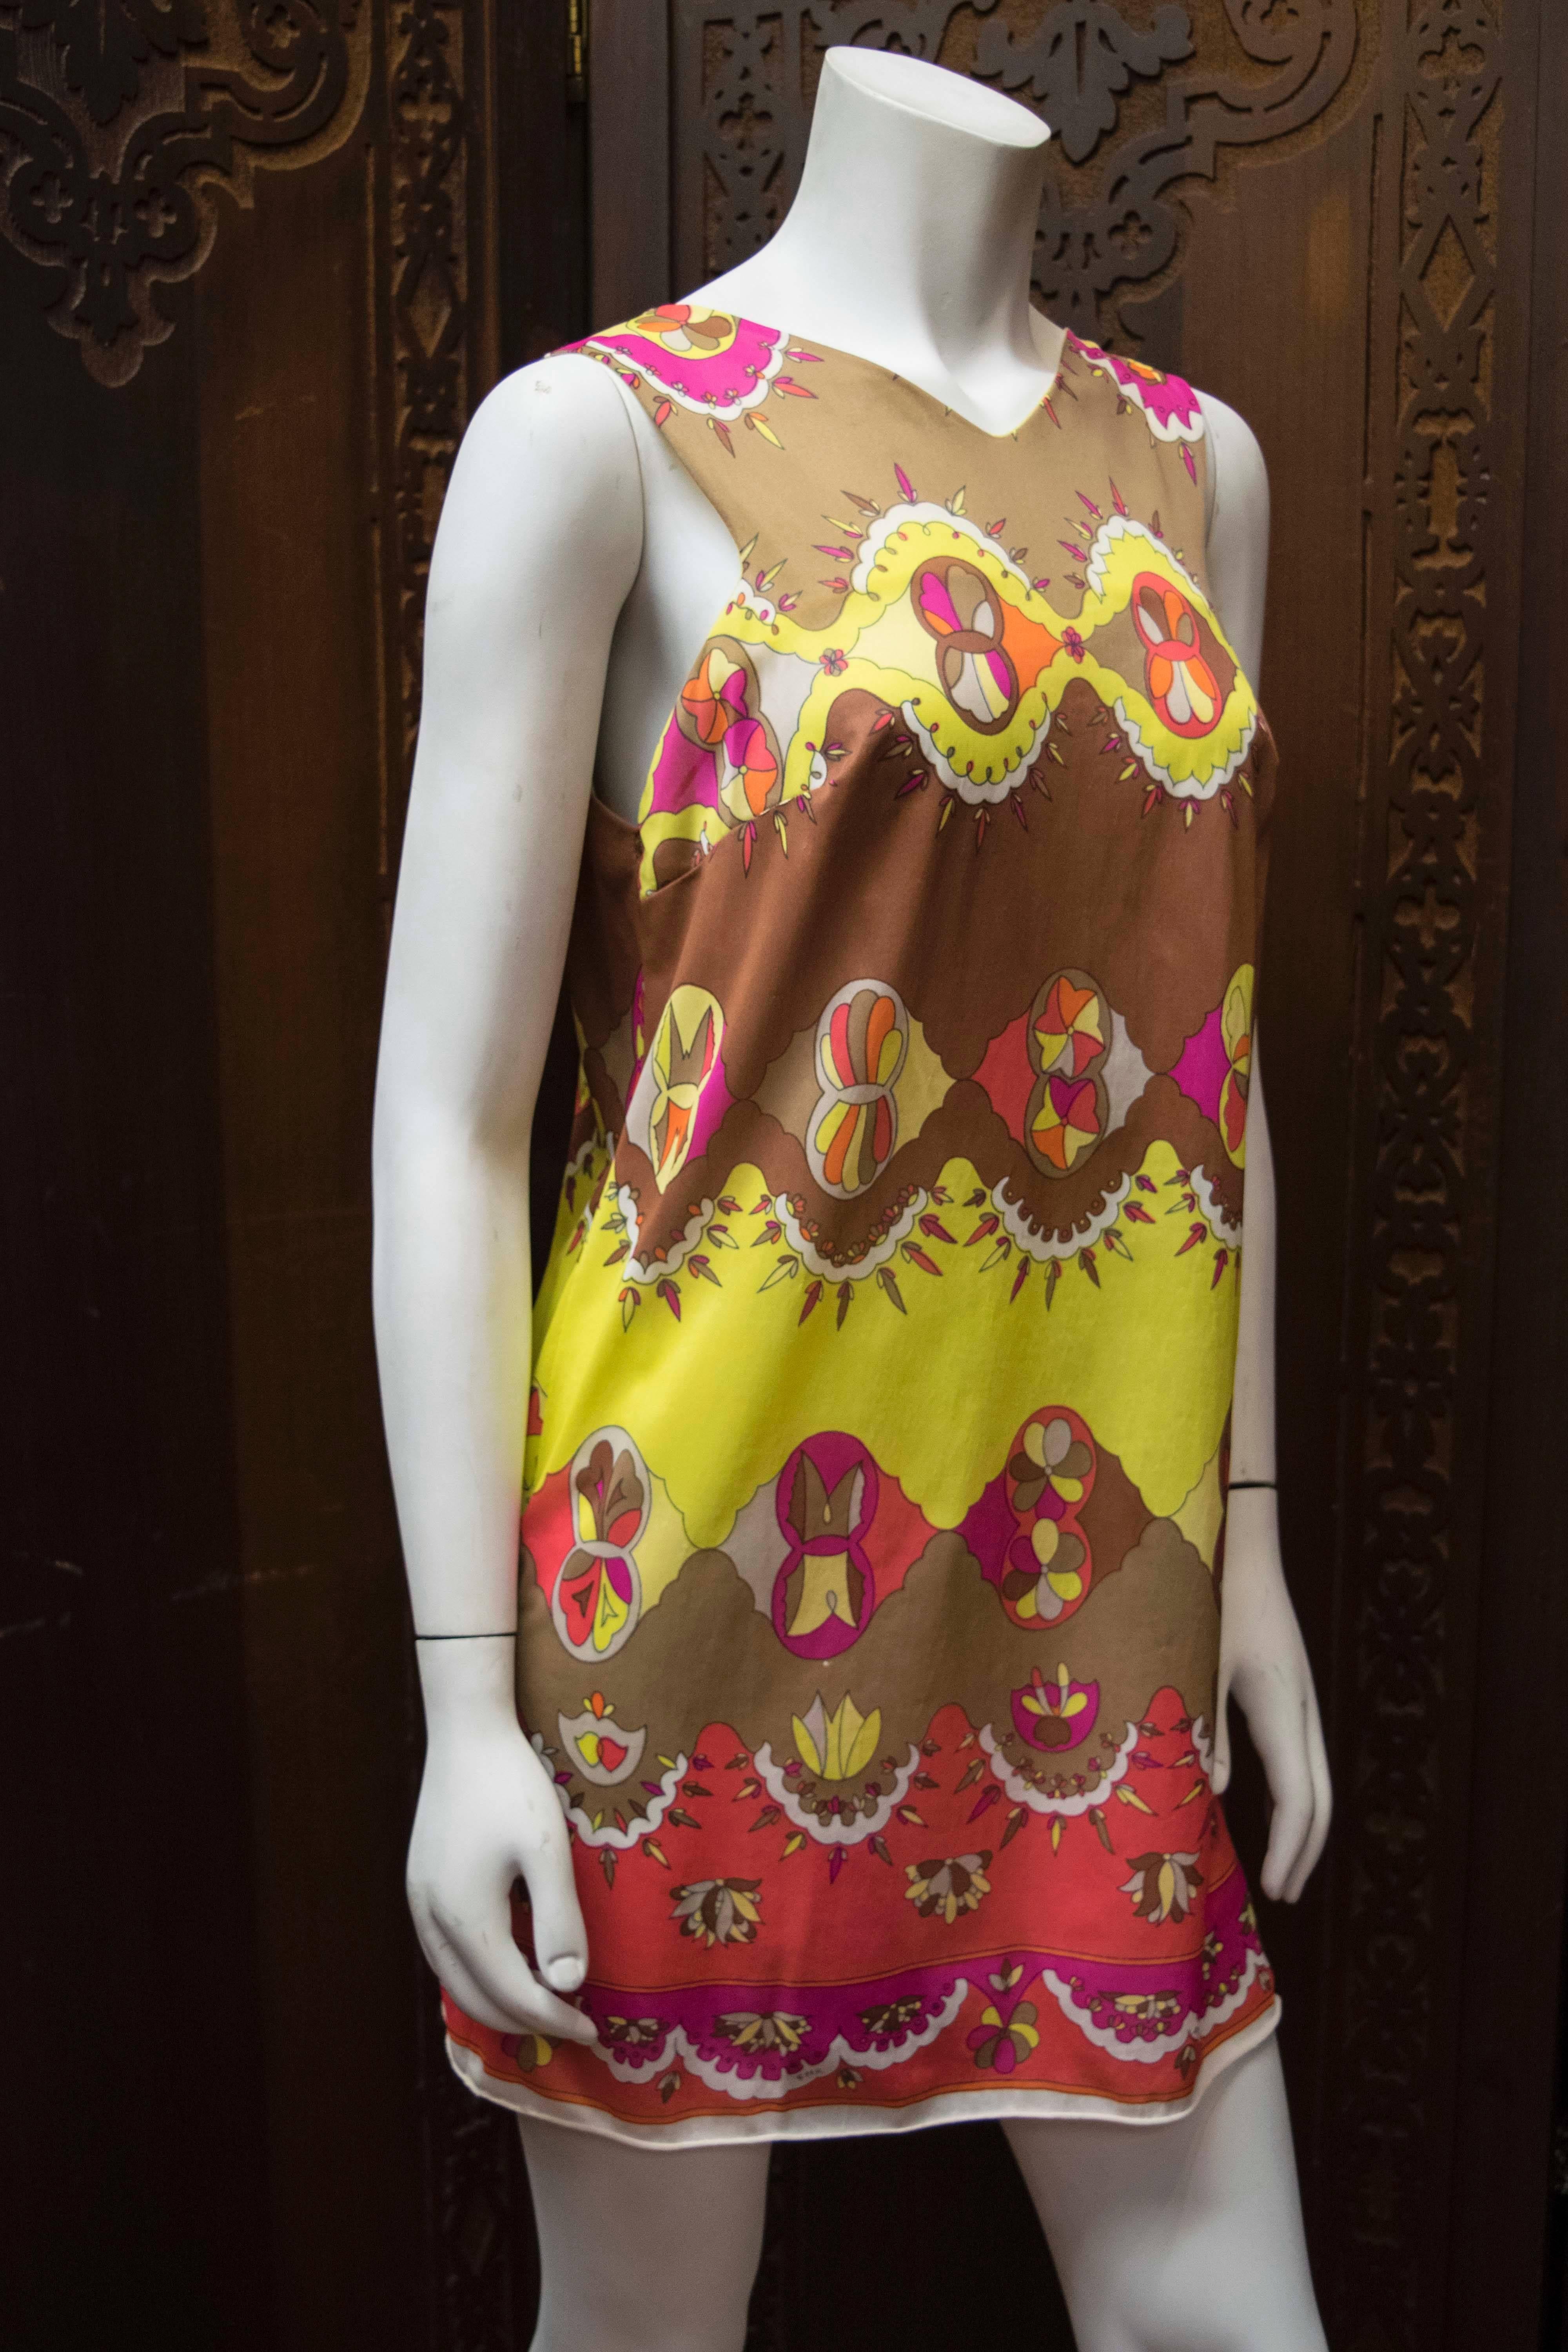 Emillio Pucci Slip Dress
Fabulous 1960s Pucci mini dress for Formfit Rogers. Trademark kaleidoscopic print.   

36 to 38 inch bust
N/A waist (since this dress has a shift/straight-waist silhouette)
39 inch hip
31 inch length

Note that this dress